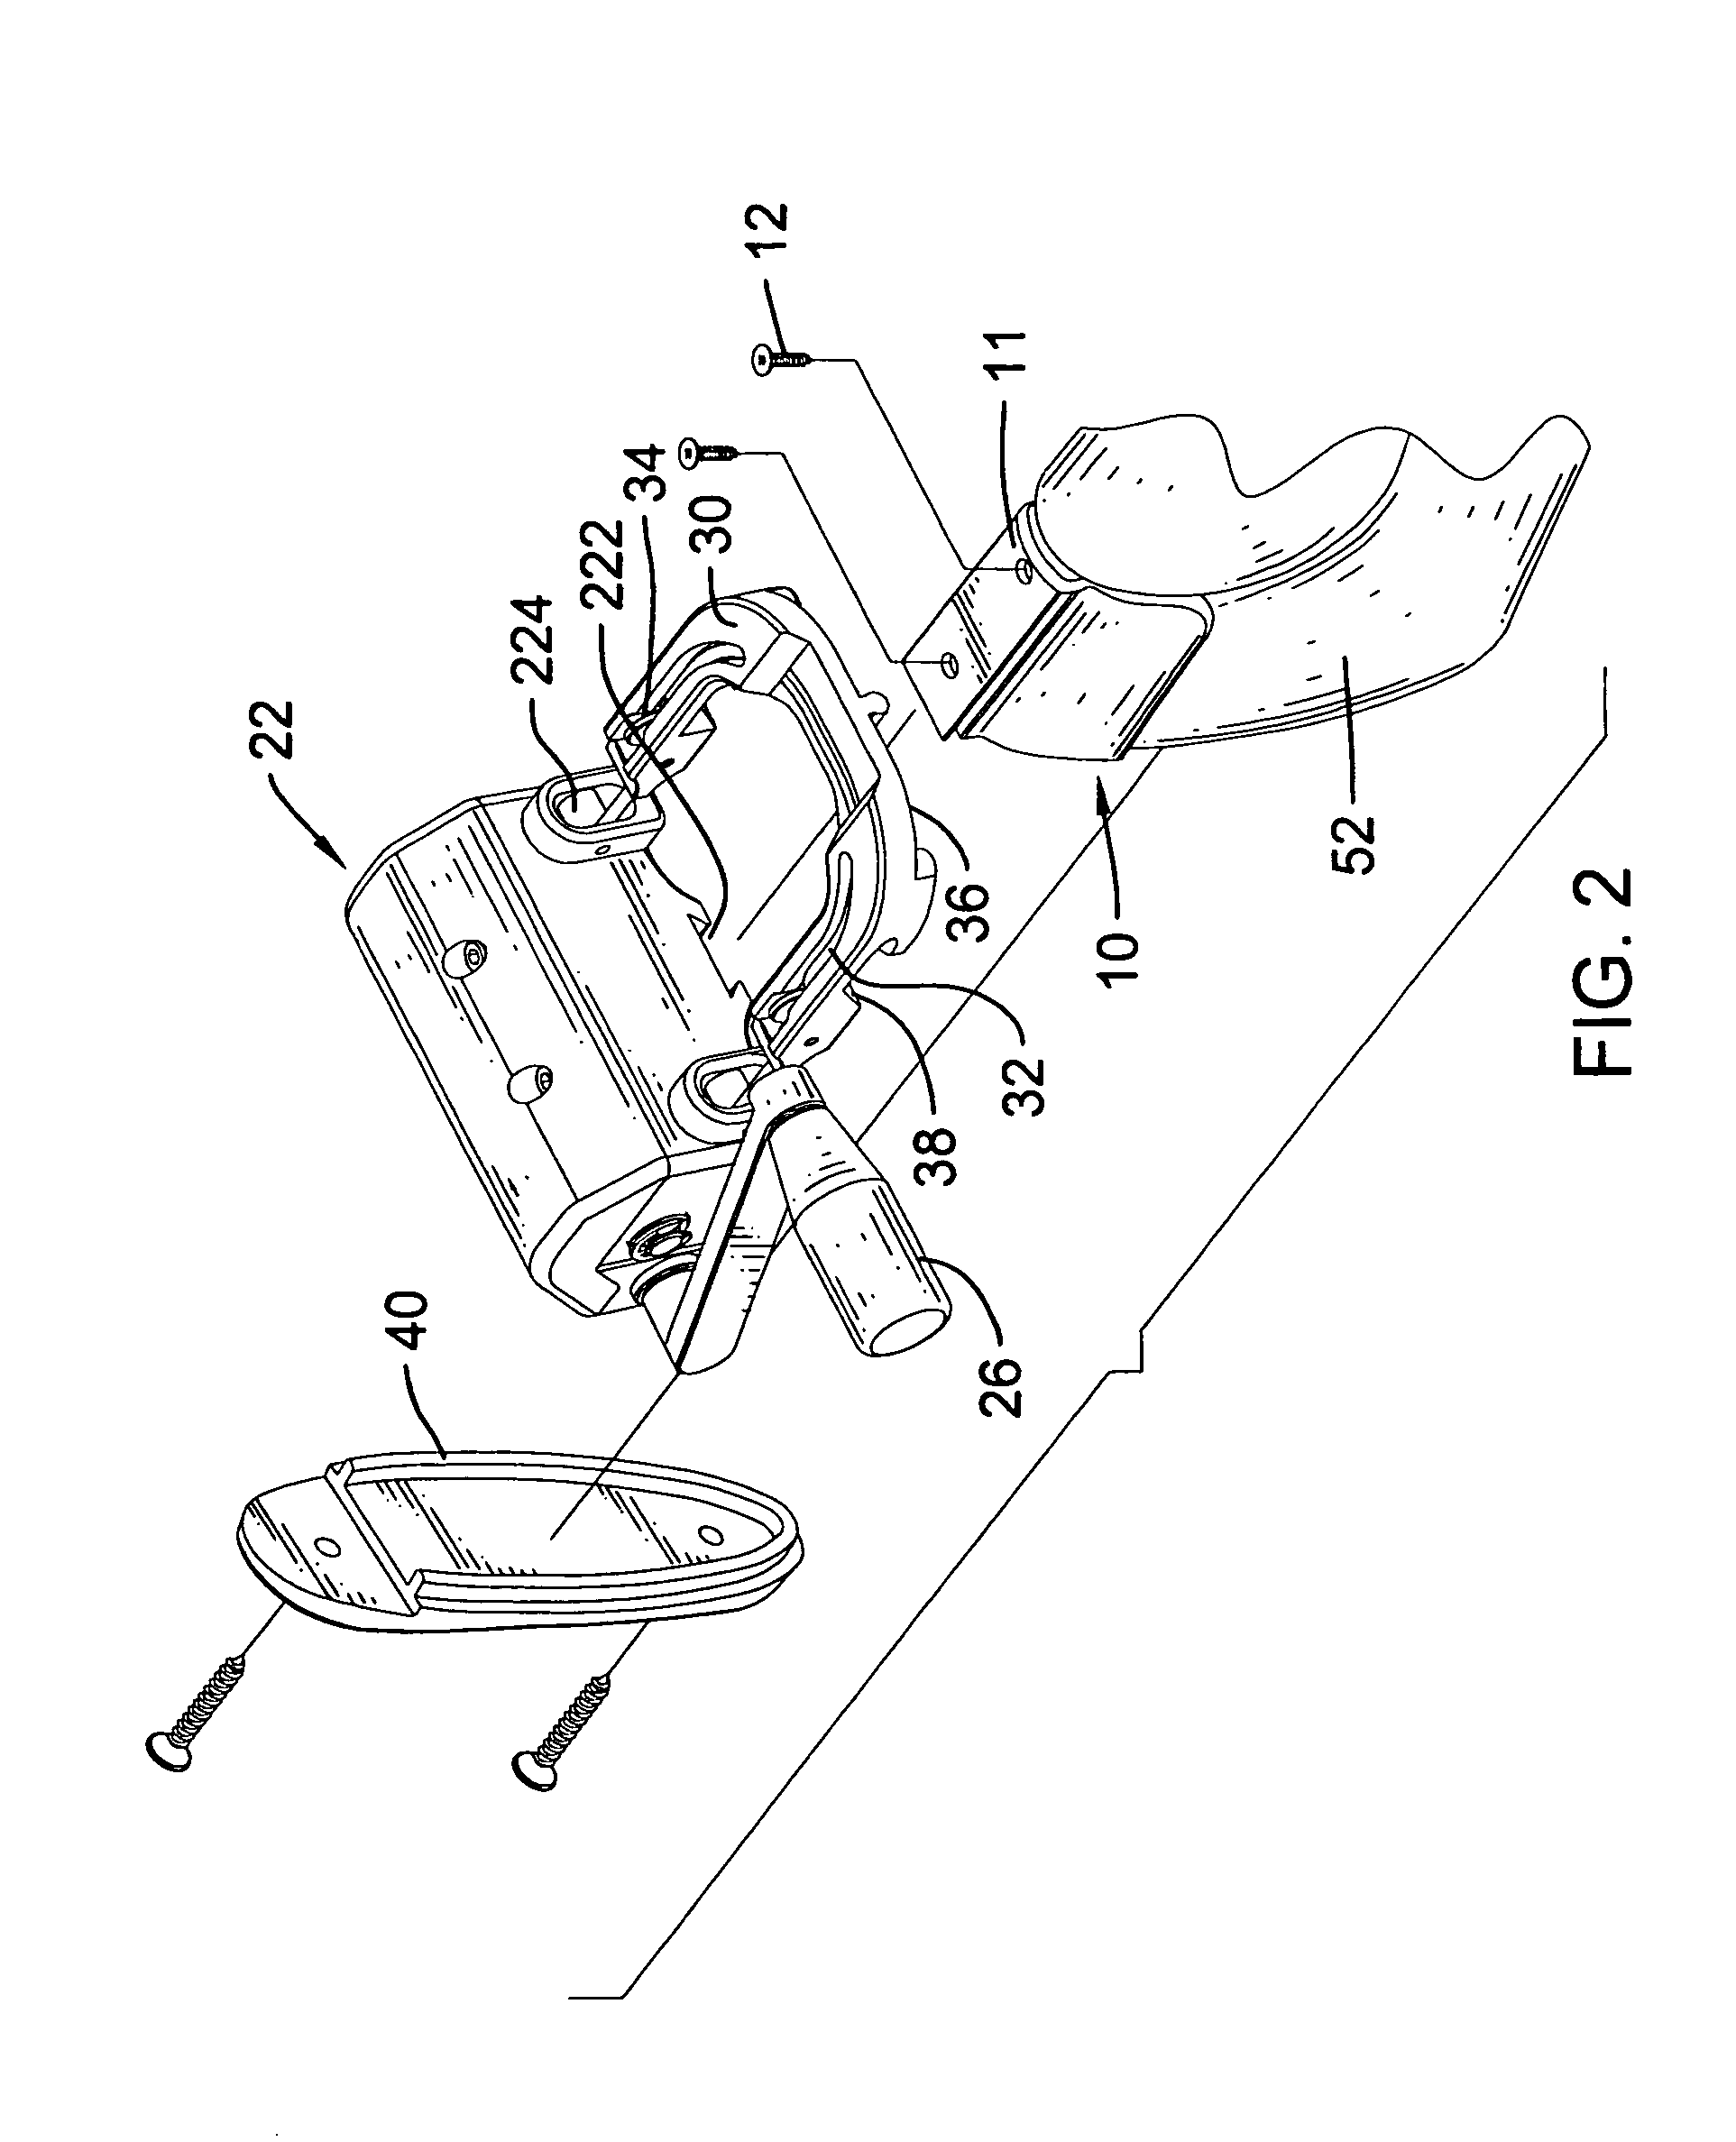 Bowstring drawing device for a crossbow